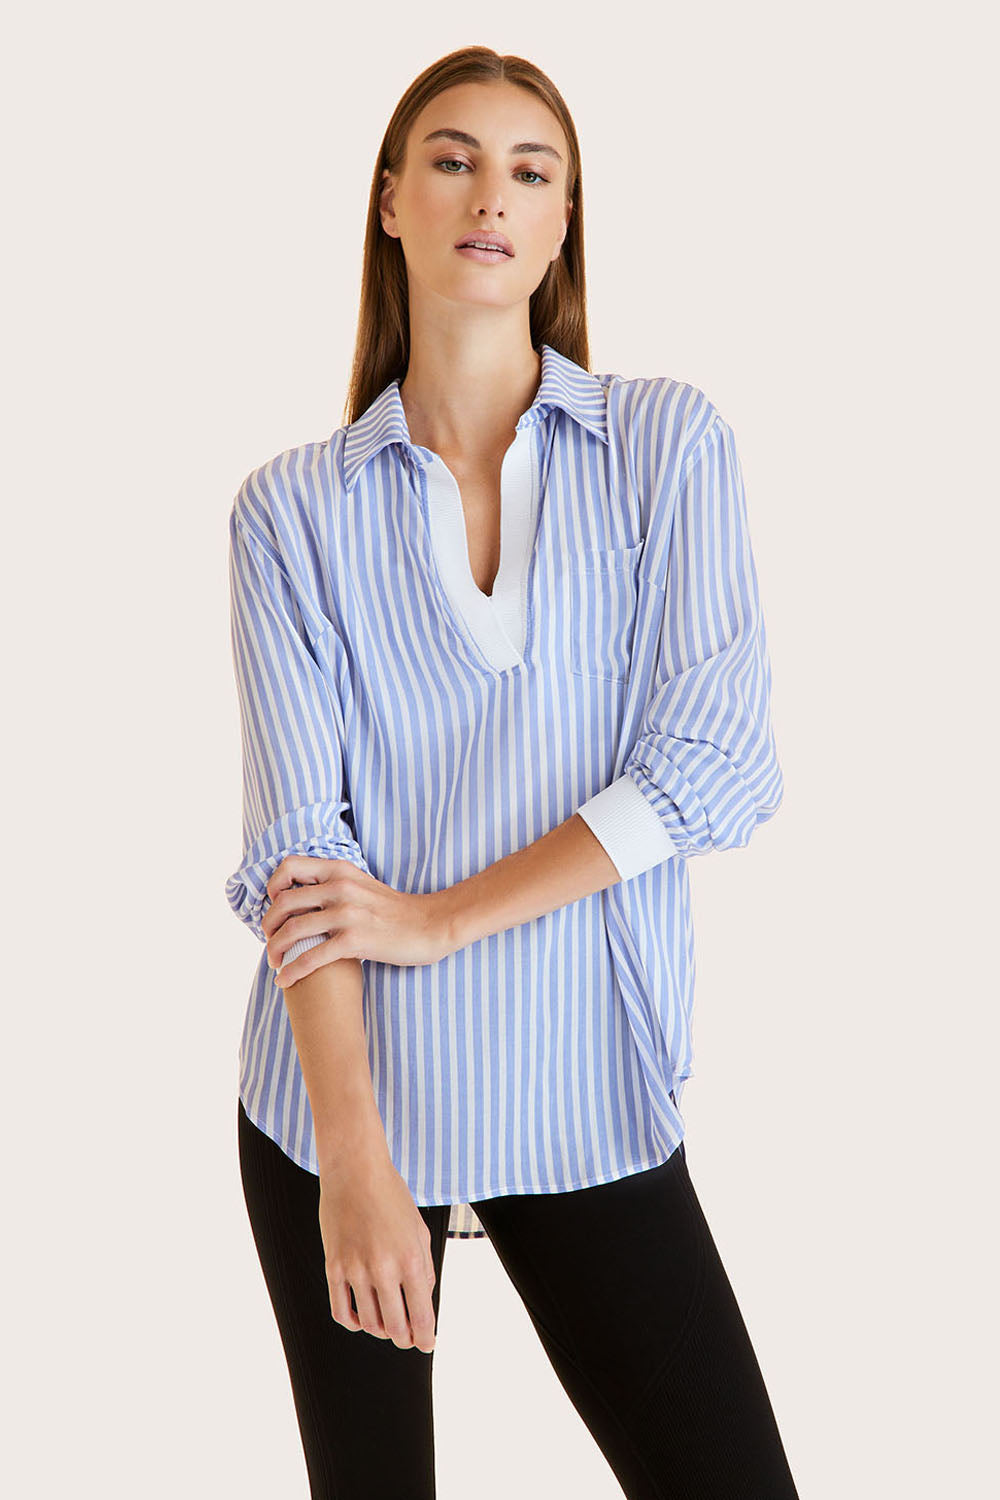 Alala women's collared blouse in blue and white stripe